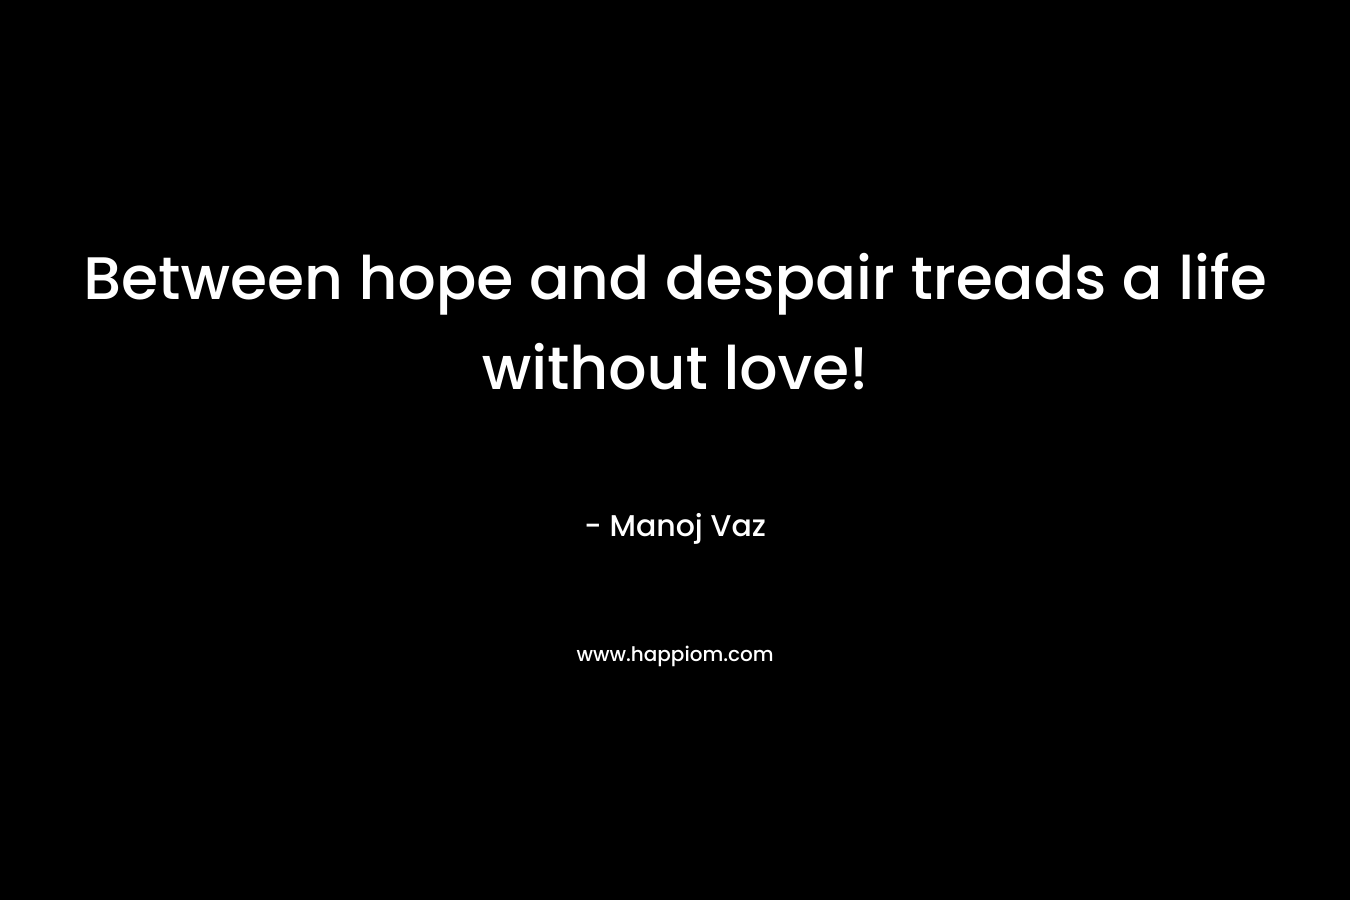 Between hope and despair treads a life without love!